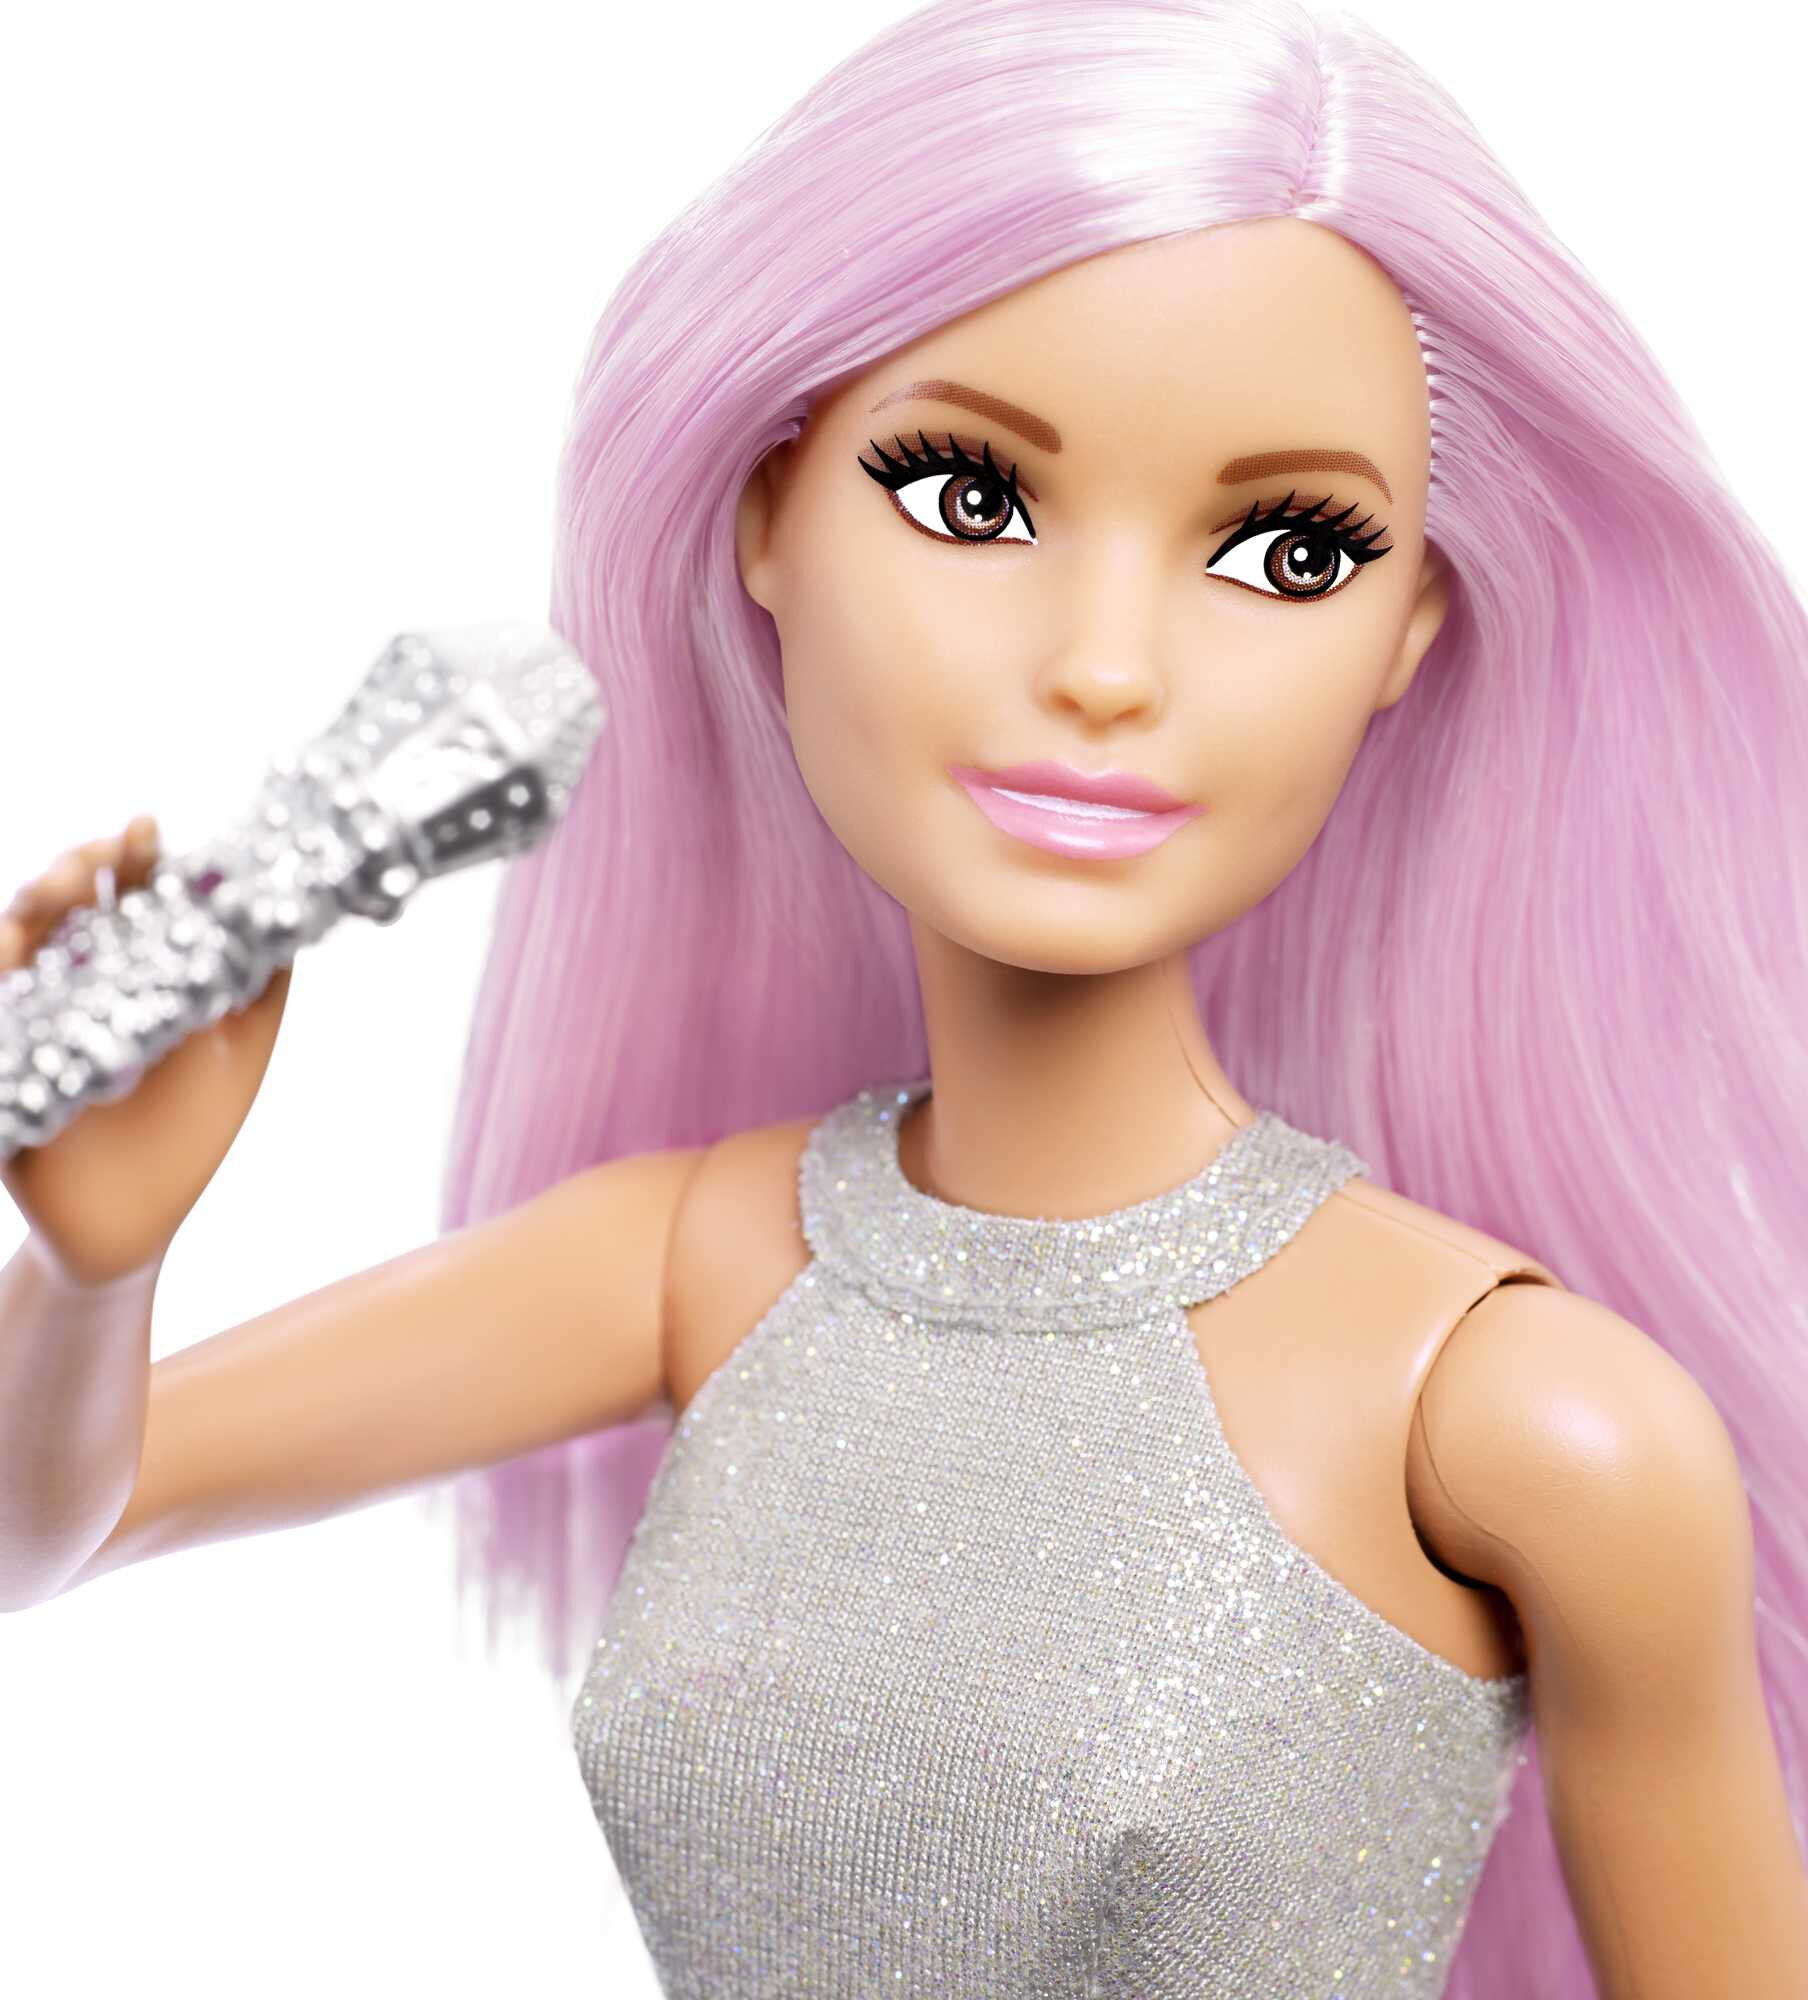 Barbie Pop Star Fashion Doll Dressed in Iridescent Skirt with Pink Hair & Brown Eyes - image 3 of 6